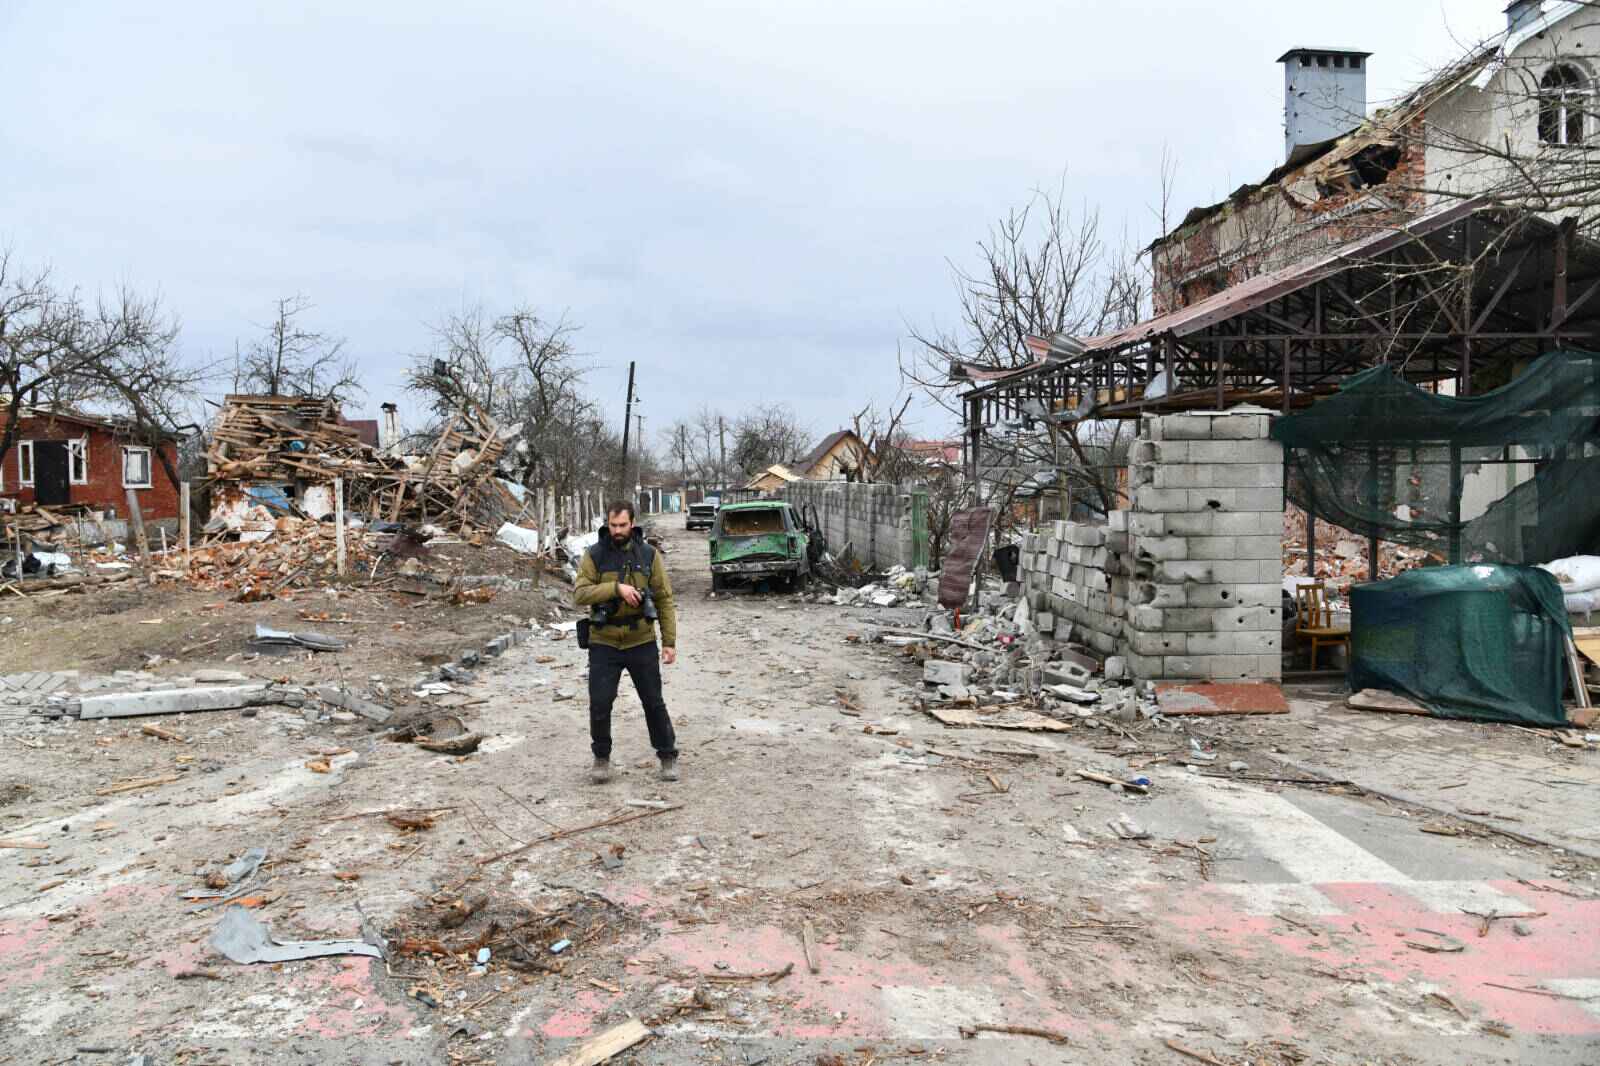 A man in a street with completely destroyed houses and vehicles